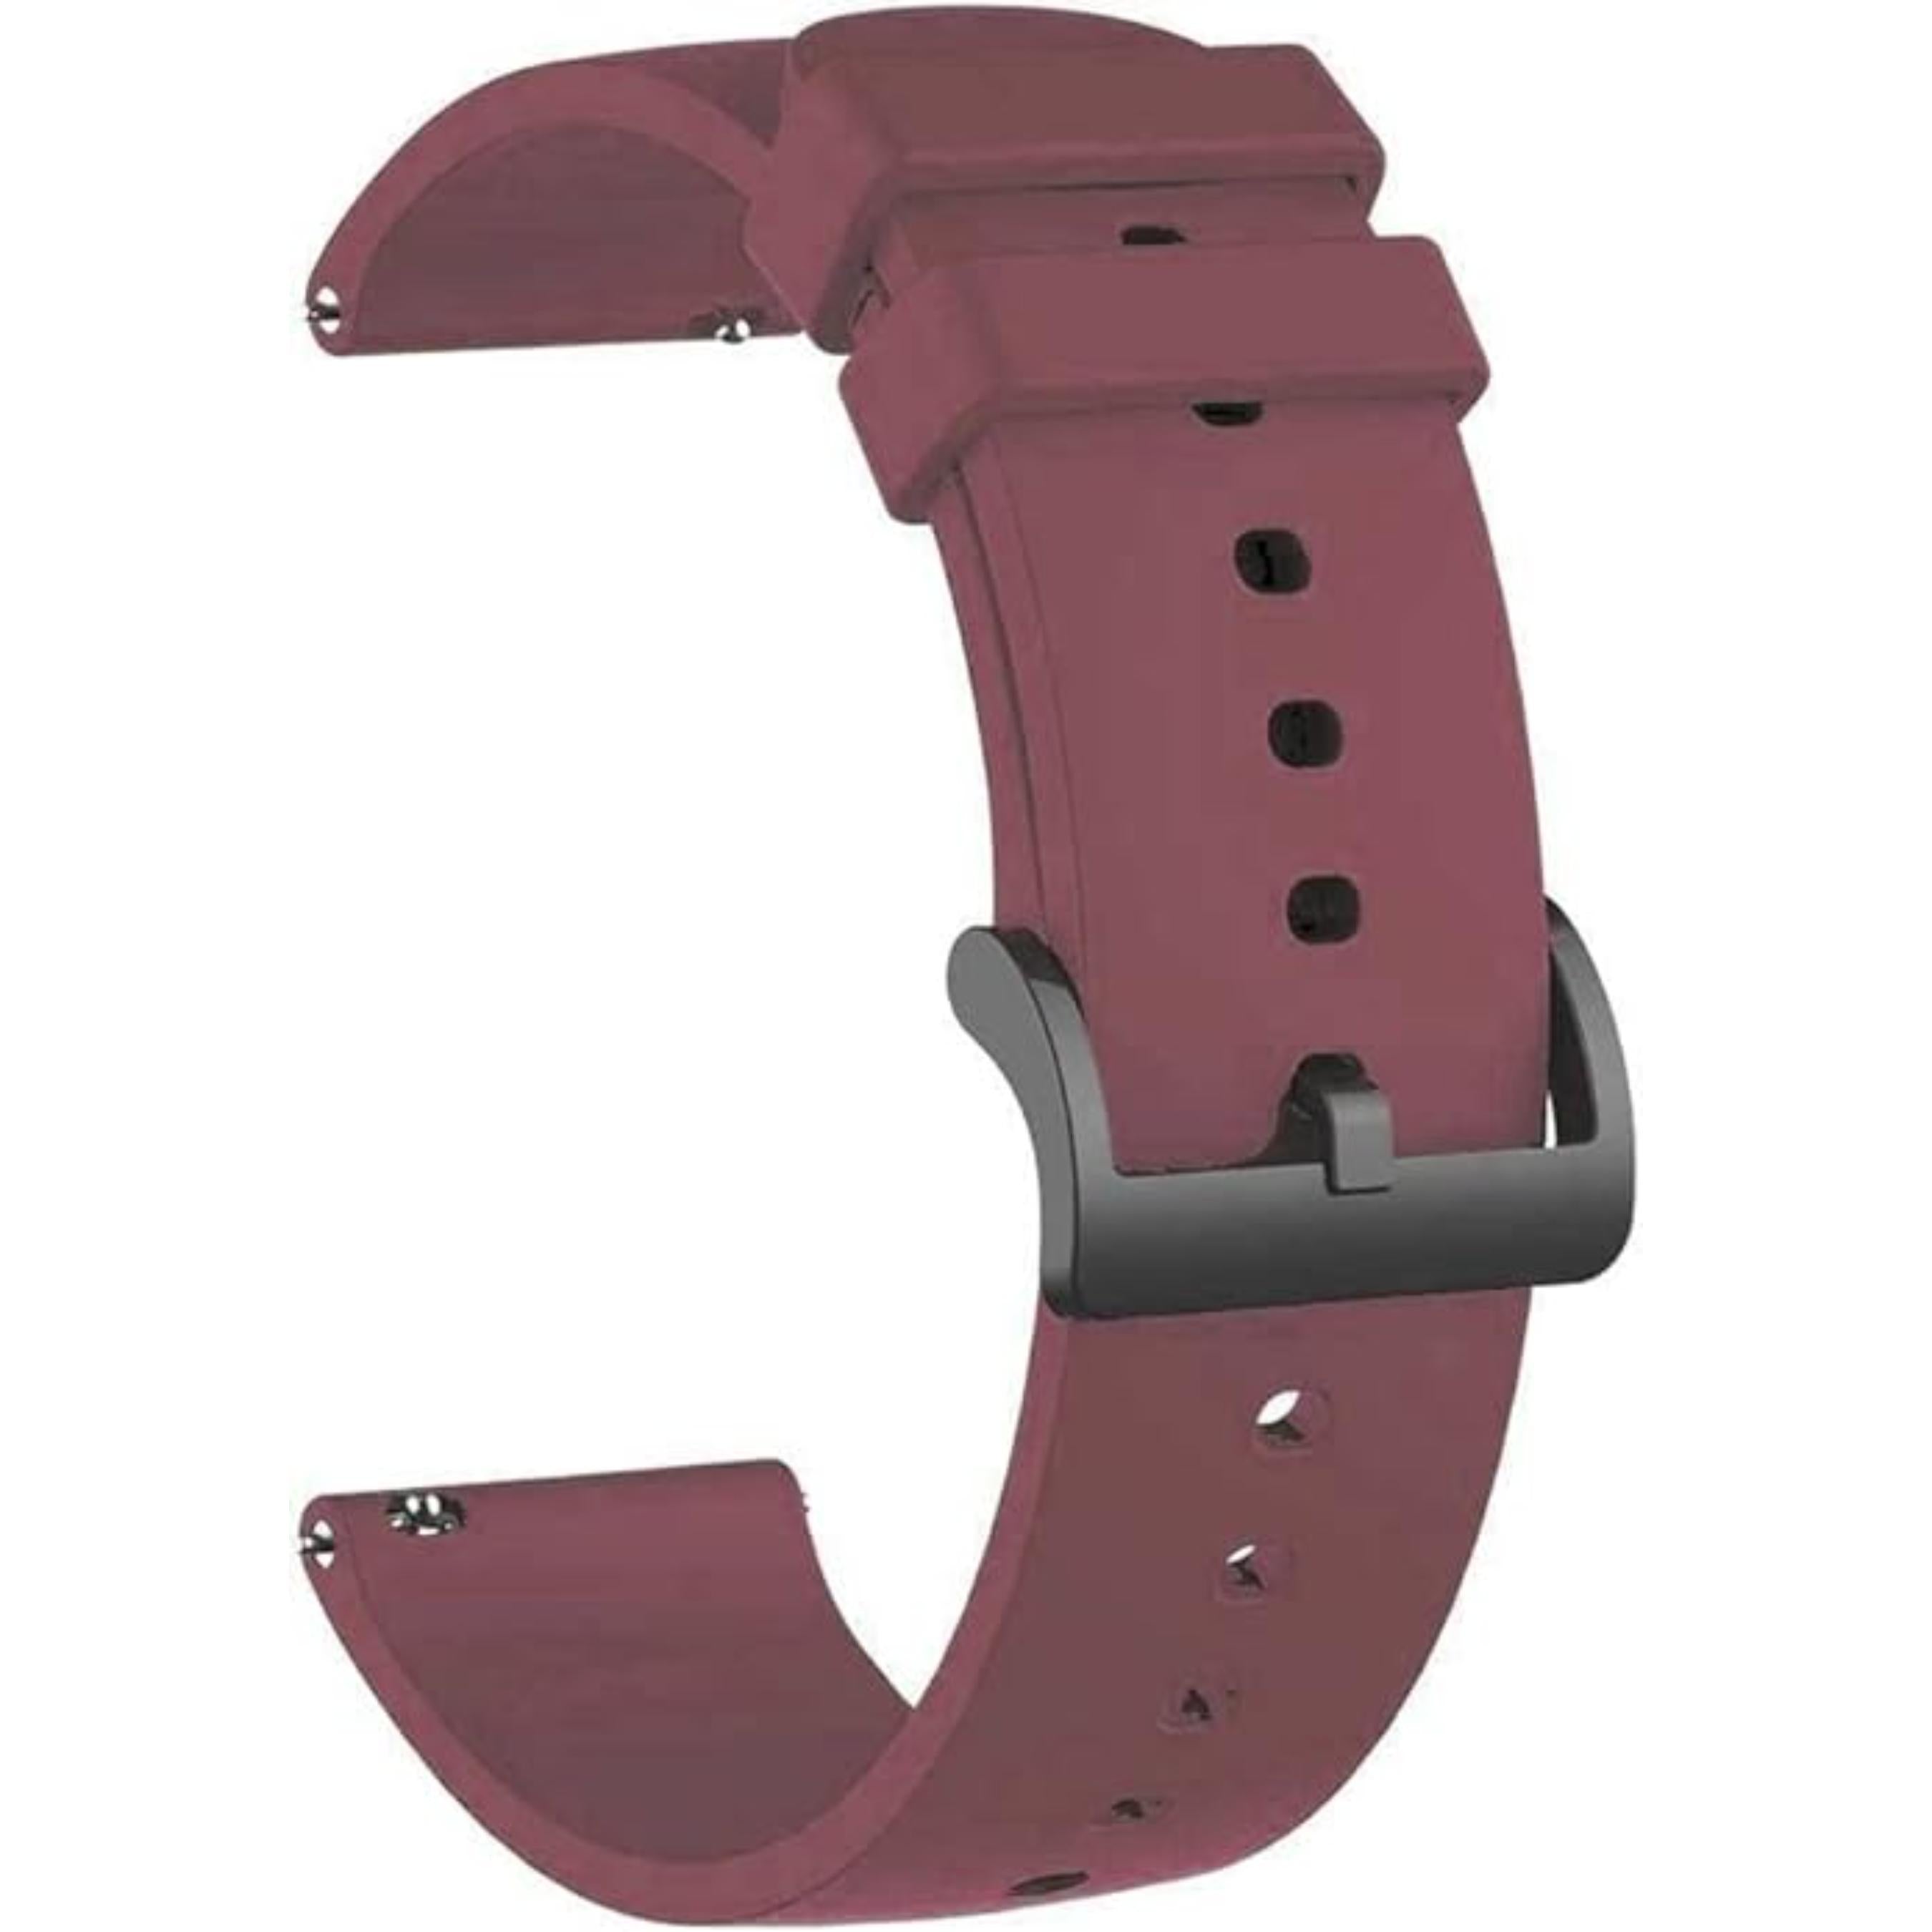 Lorenz Silicone 22MM Replacement Watch Strap With Buckle Lock Compatible with Boat Xtend, Boat Xtend Pro, Noise Colorfit Pulse 2 Max, Noise Pulse Go Buzz, Fireboltt Phoenix & all other Watches (Maroon)